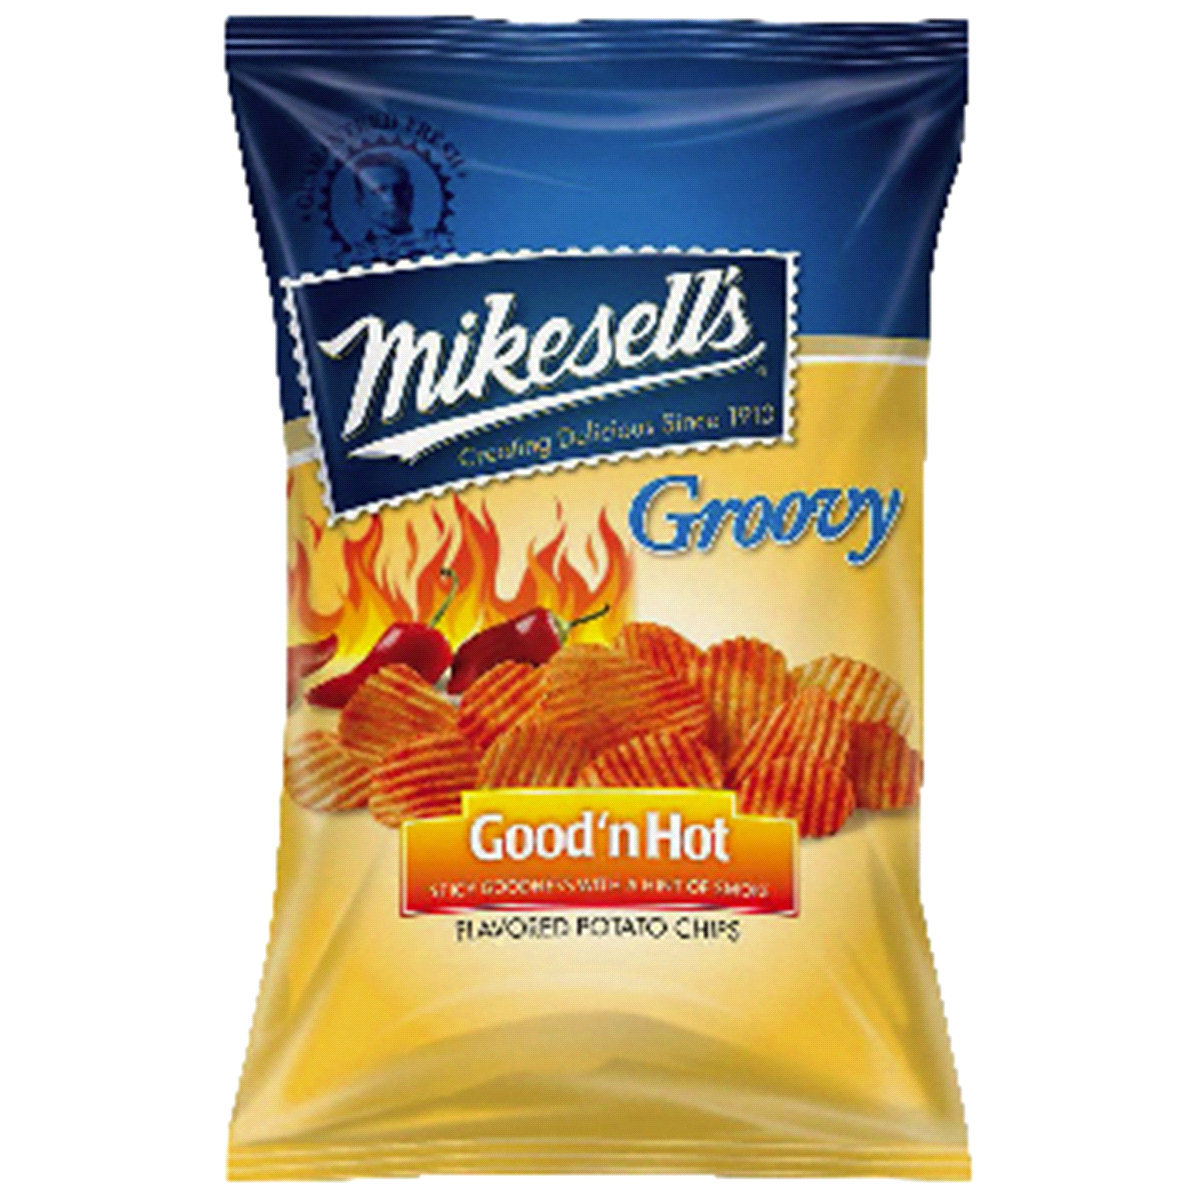 slide 1 of 1, Mikesell's Groovy Good'n Hot Flavored Potato Chips, 10 oz